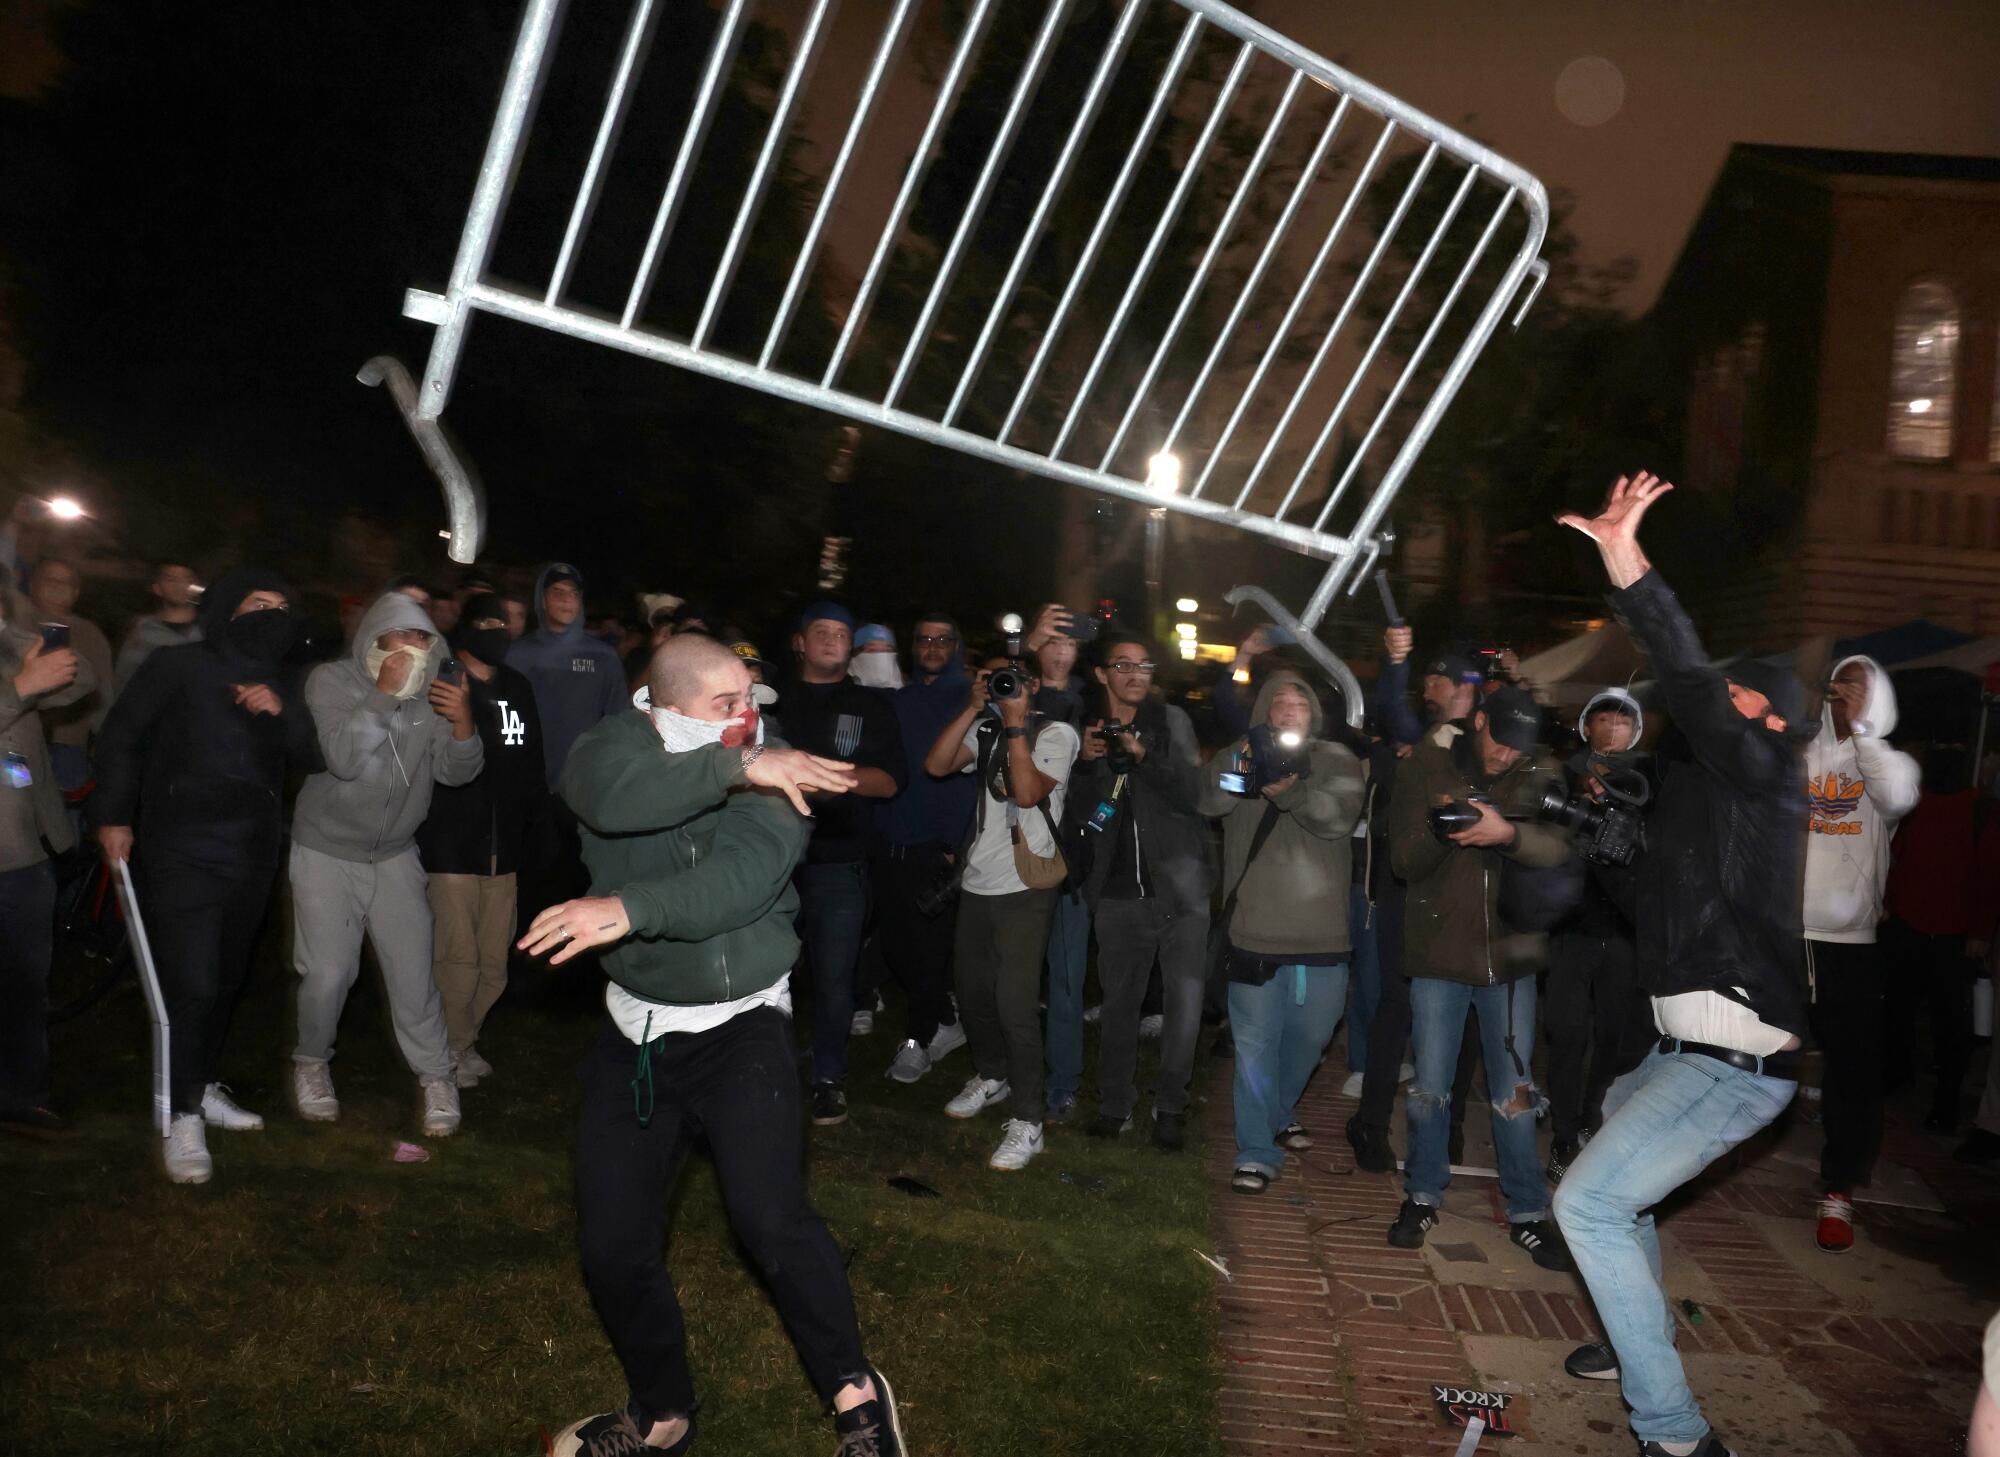 Pro-Palestinian protestors and pro-Israeli supporters clash at an encampment at UCLA early Wednesday morning.